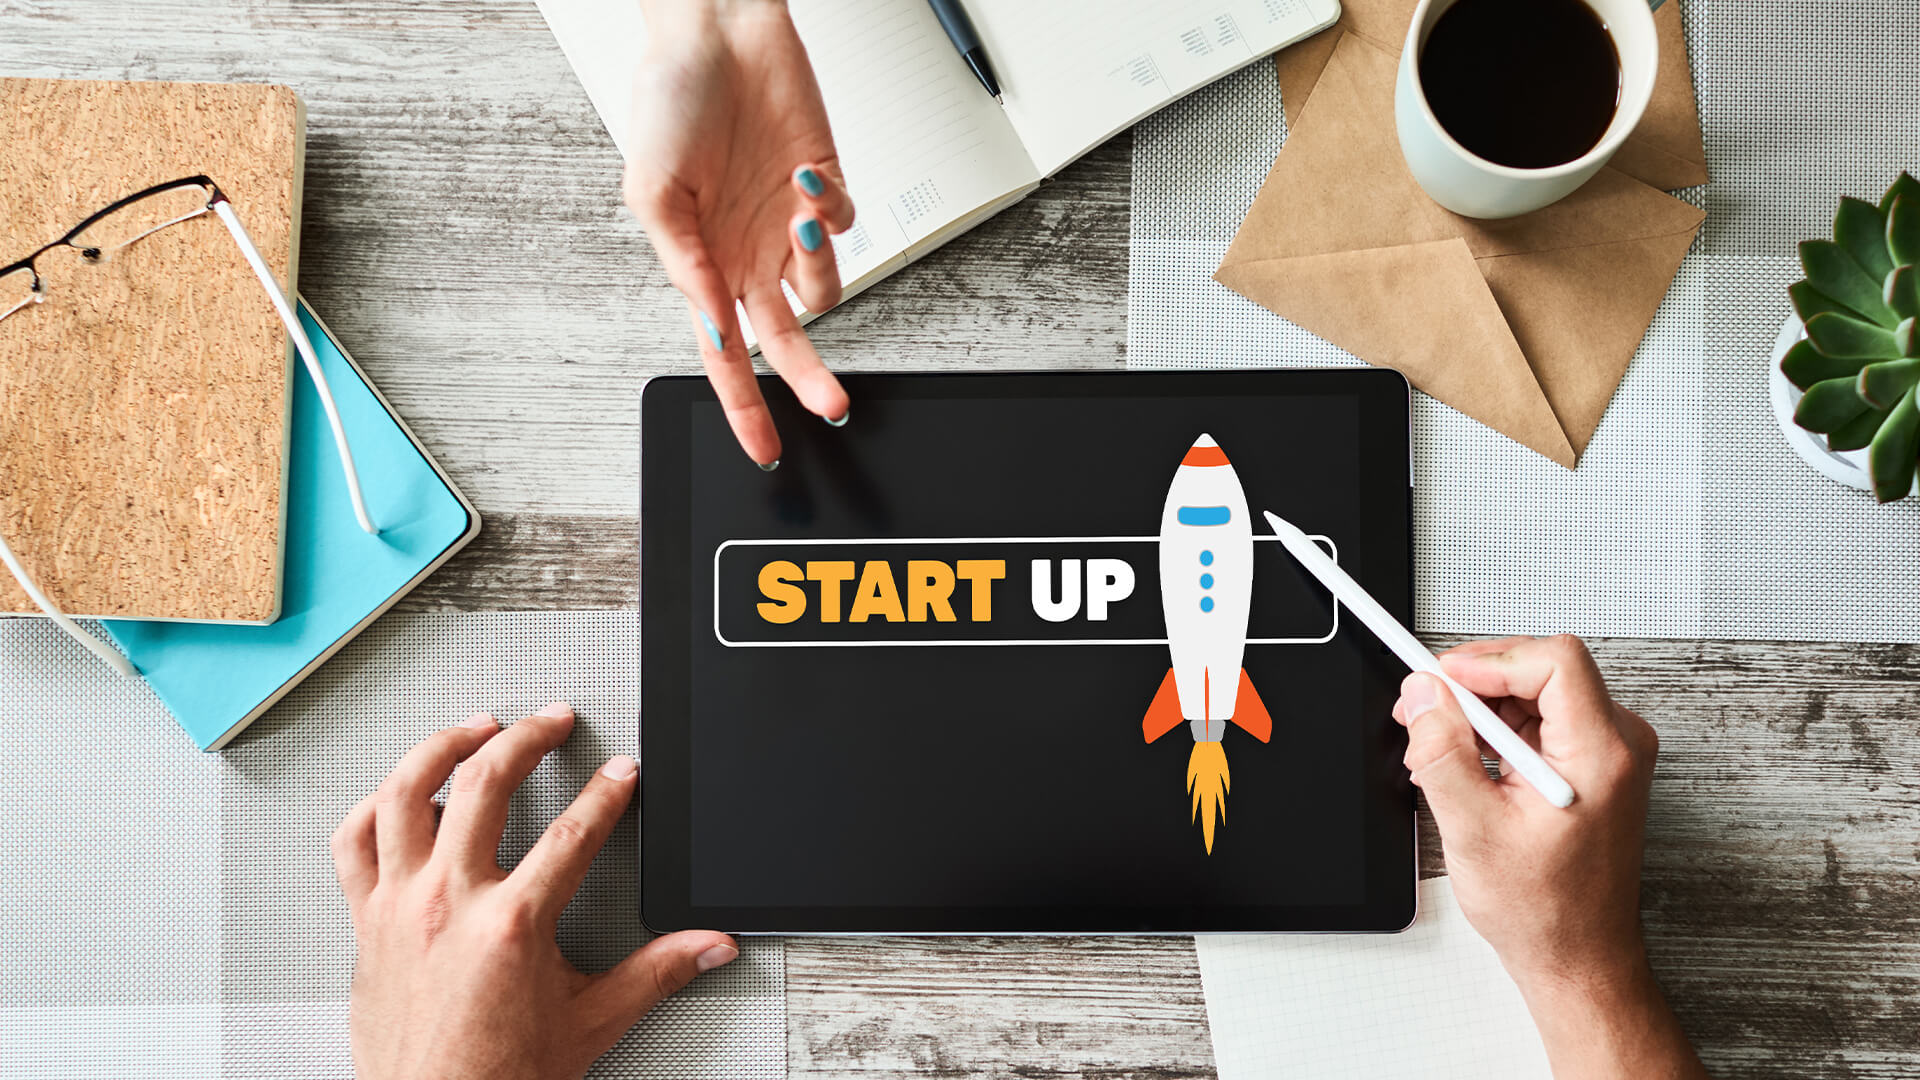 11 Tech Startup Ideas That You Can Try to Help Build Your Business Empire -  SME News